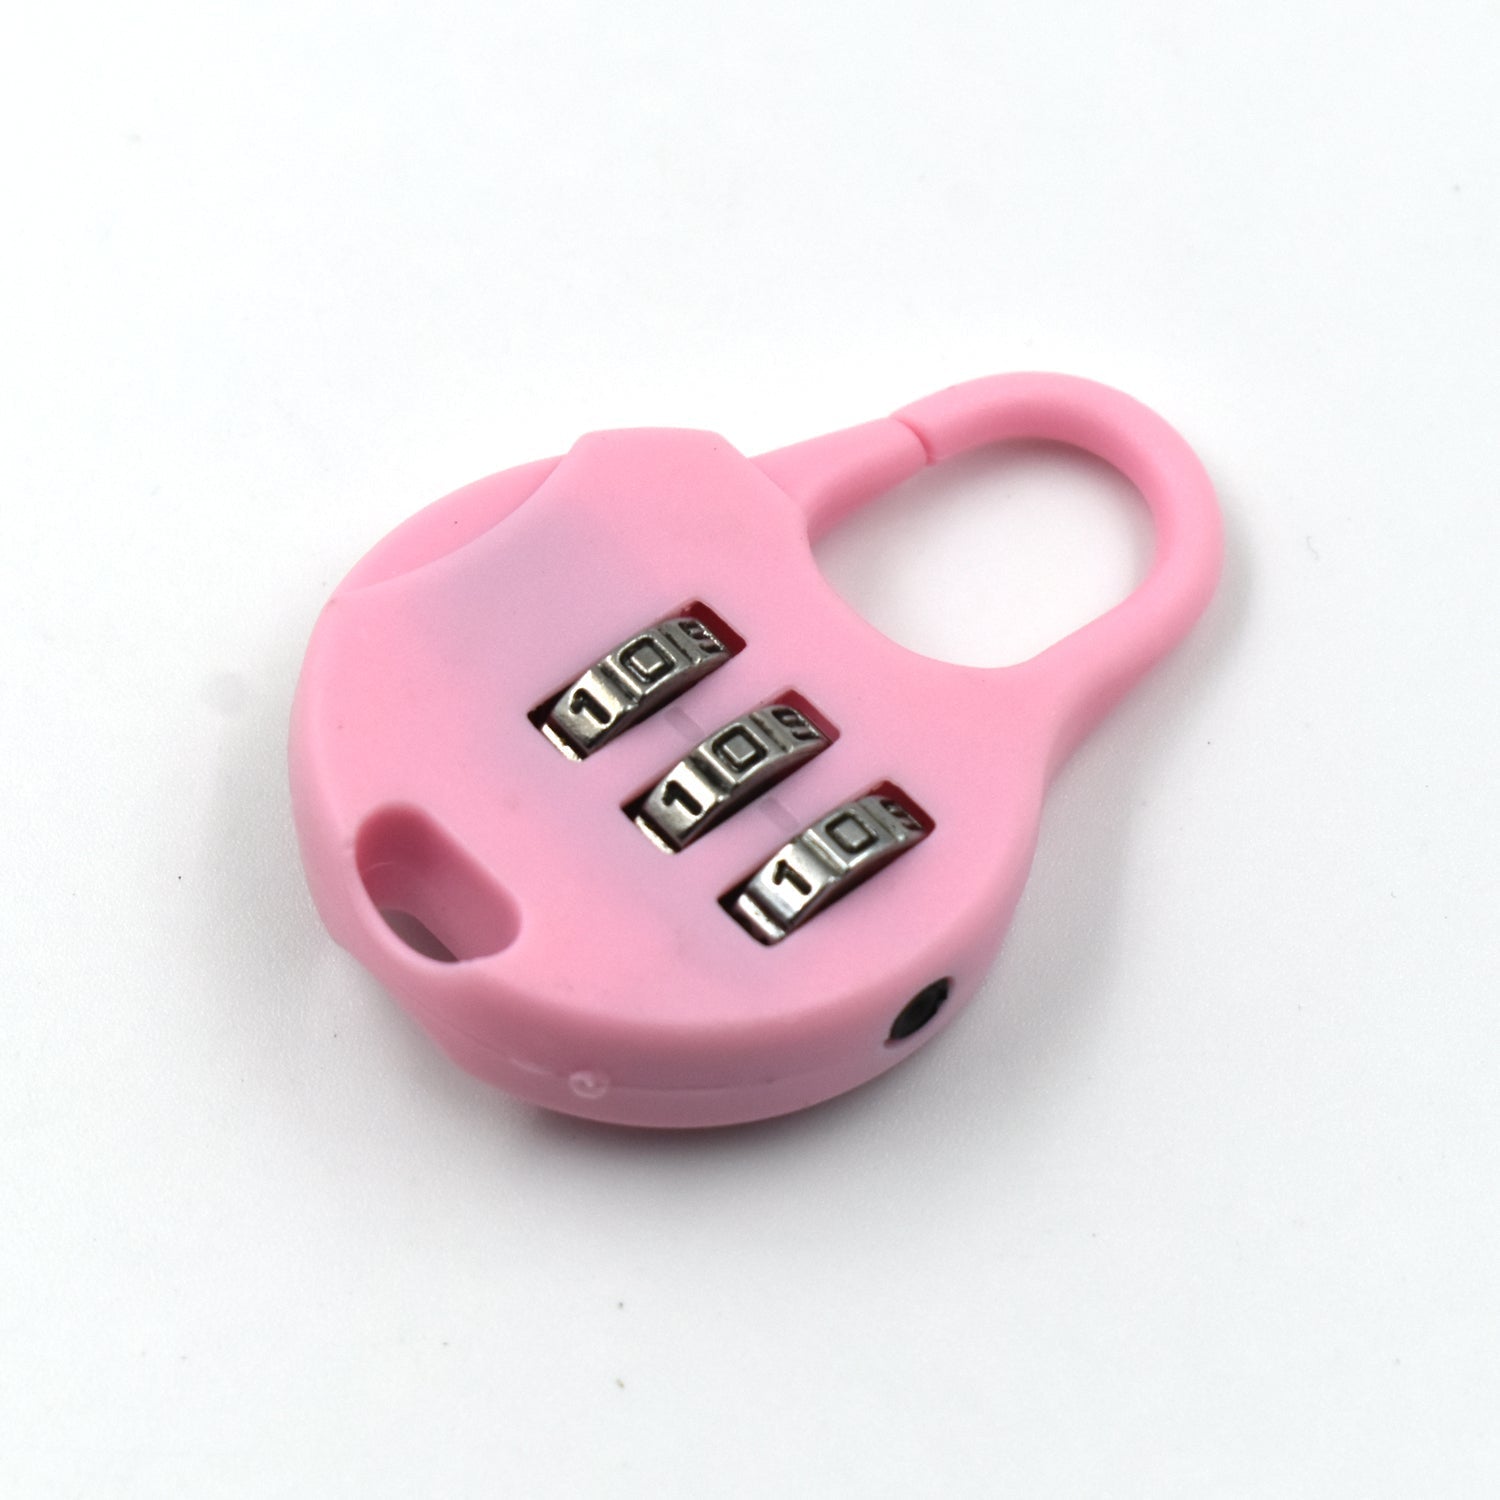 6108 3 Digit Zipper Lock and zipper tool used widely in all security purposes of zipper materials.